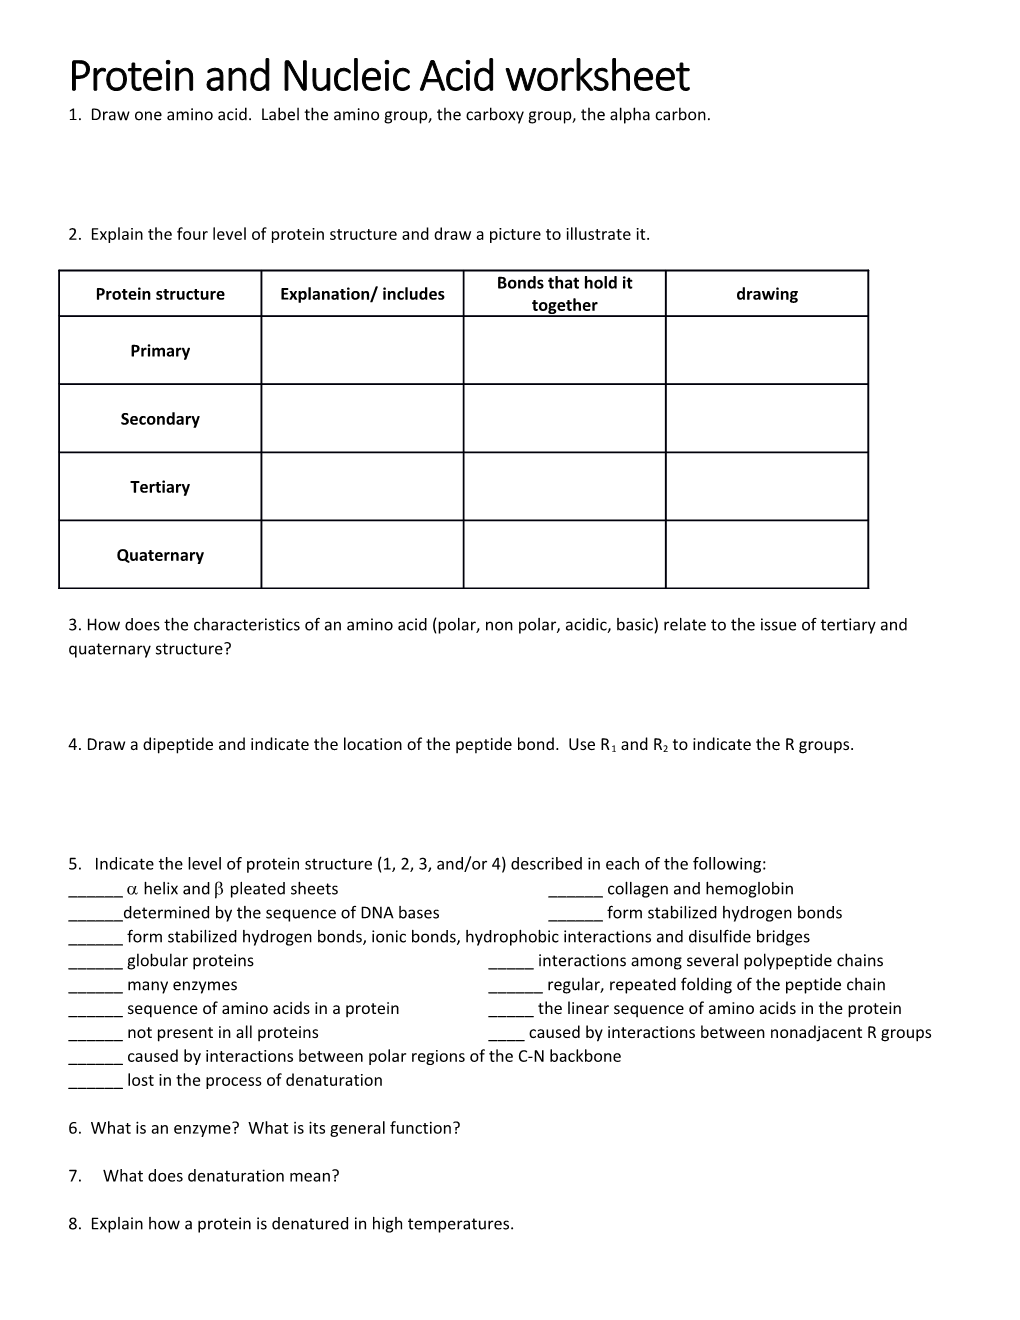 Protein and Nucleic Acid Worksheet